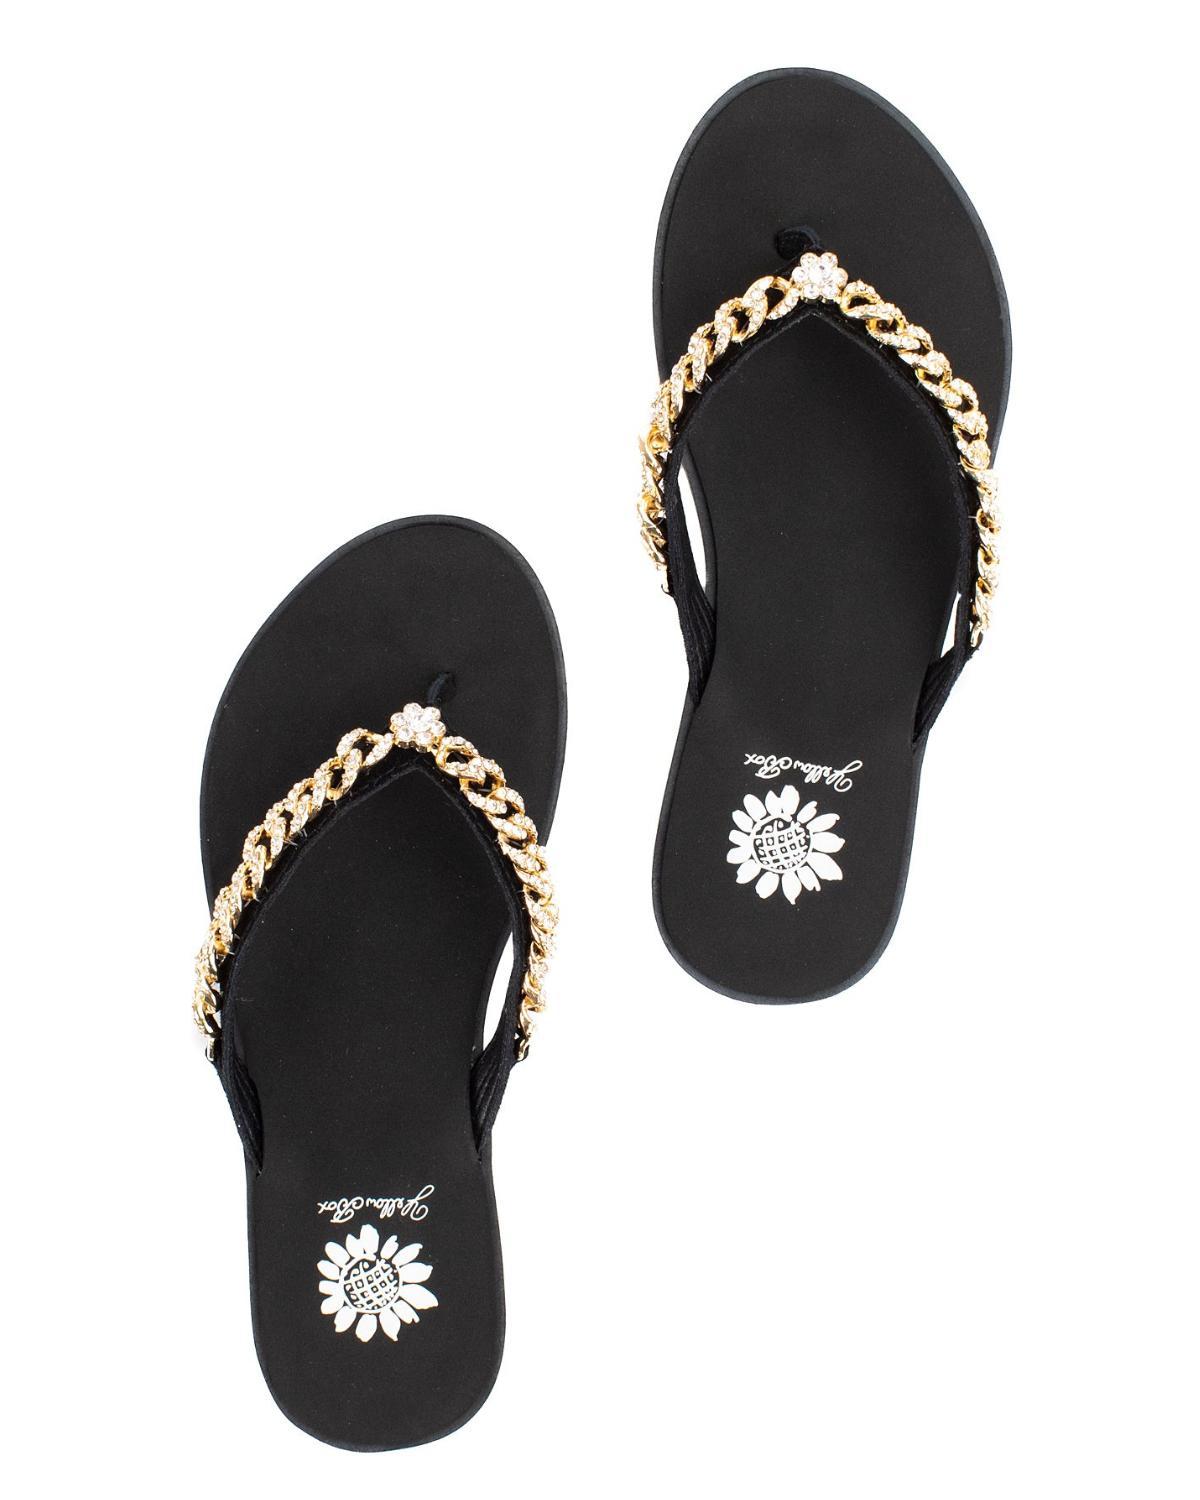 Women's black sandal with gold chain detail on the strap.